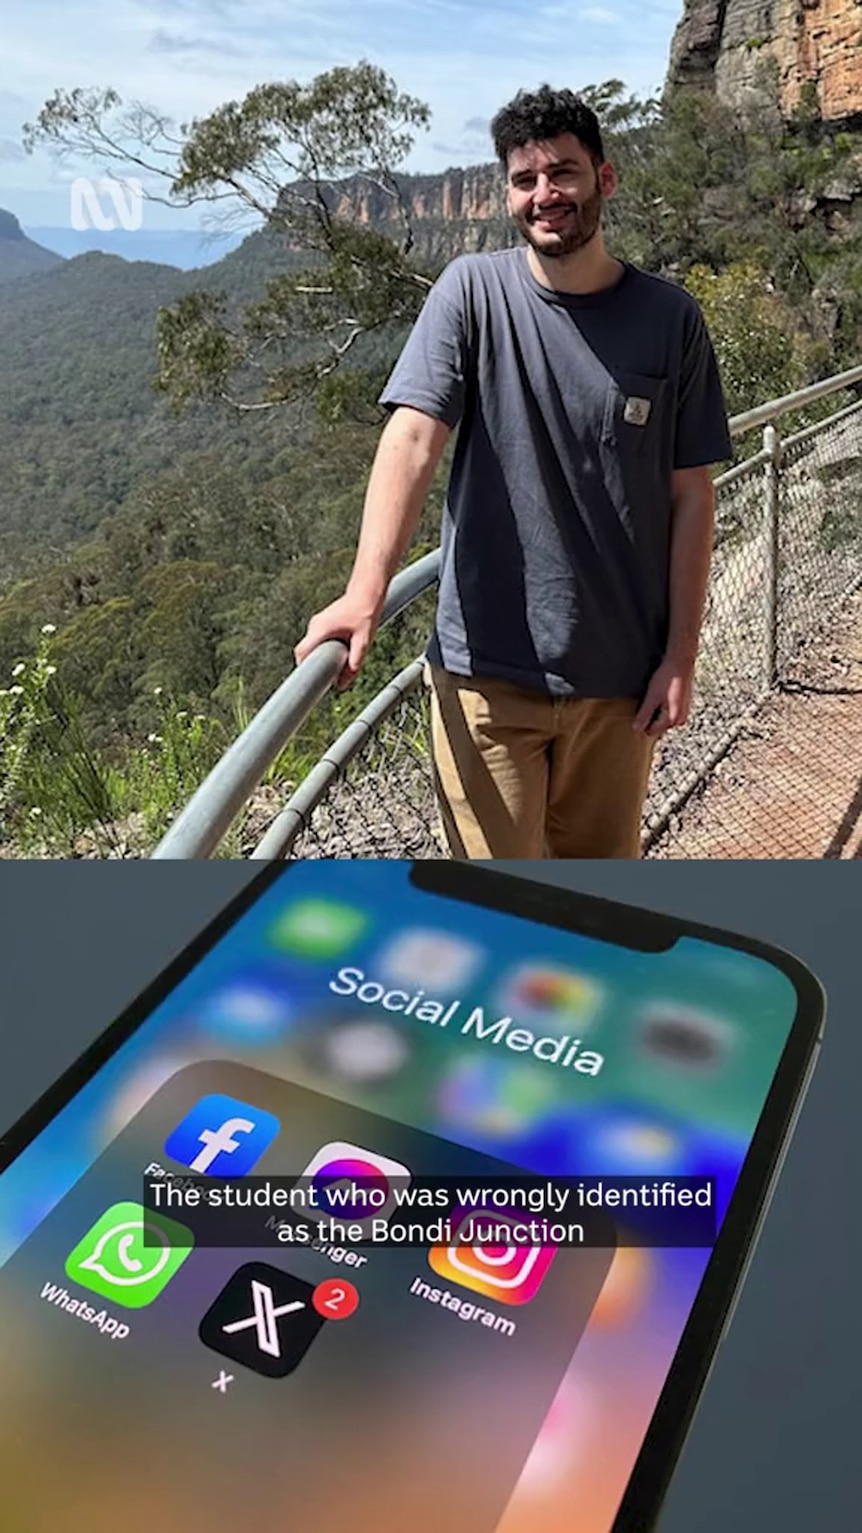 Composite image shows young man standing at lookout in bush and a smartphone showing social media app launch buttons